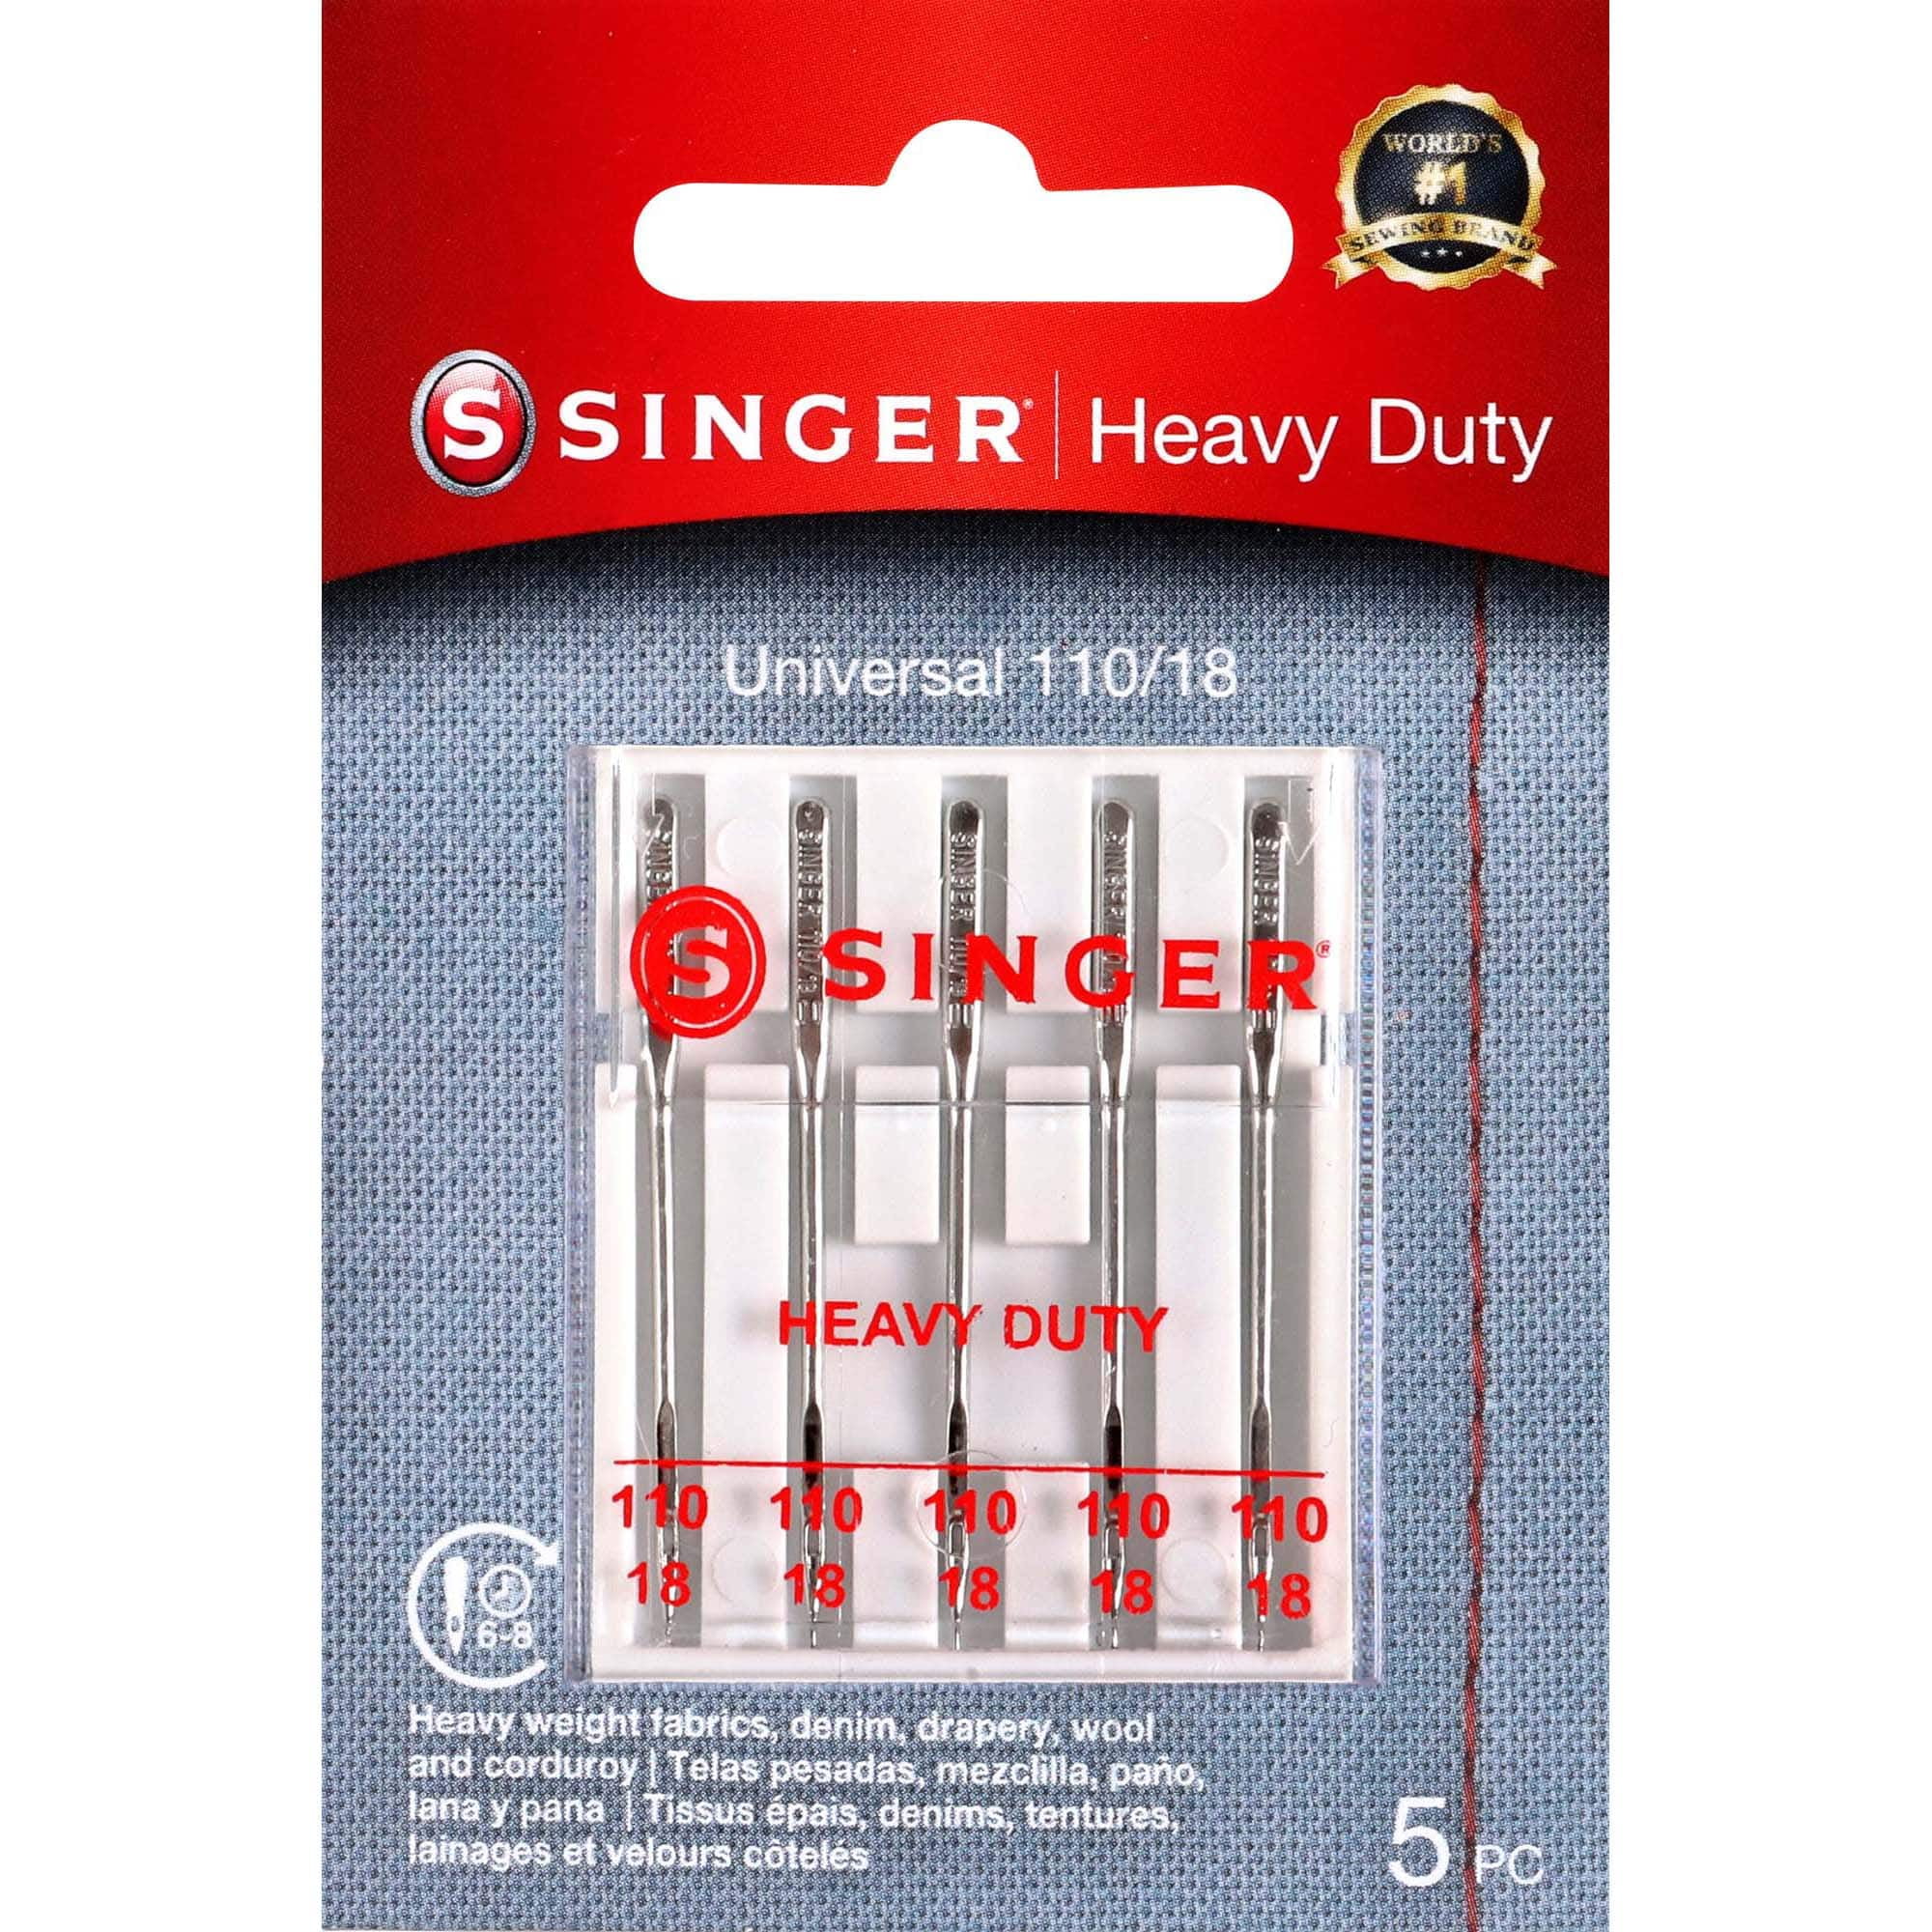 12 Packs: 5 Ct. (60 Total) Singer Heavy Duty Sewing Machine Needles, Size: 0.29 x 3.56 x 2.38, Silver